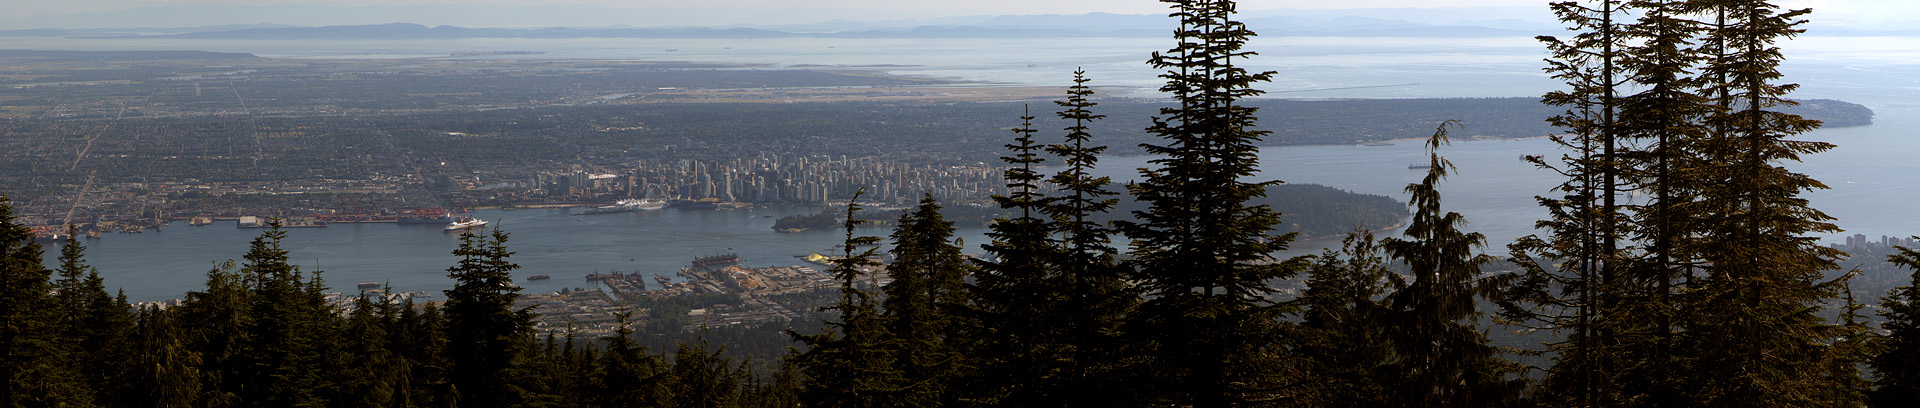 Vancouver from Grouse Mountain, British Columbia, Canada